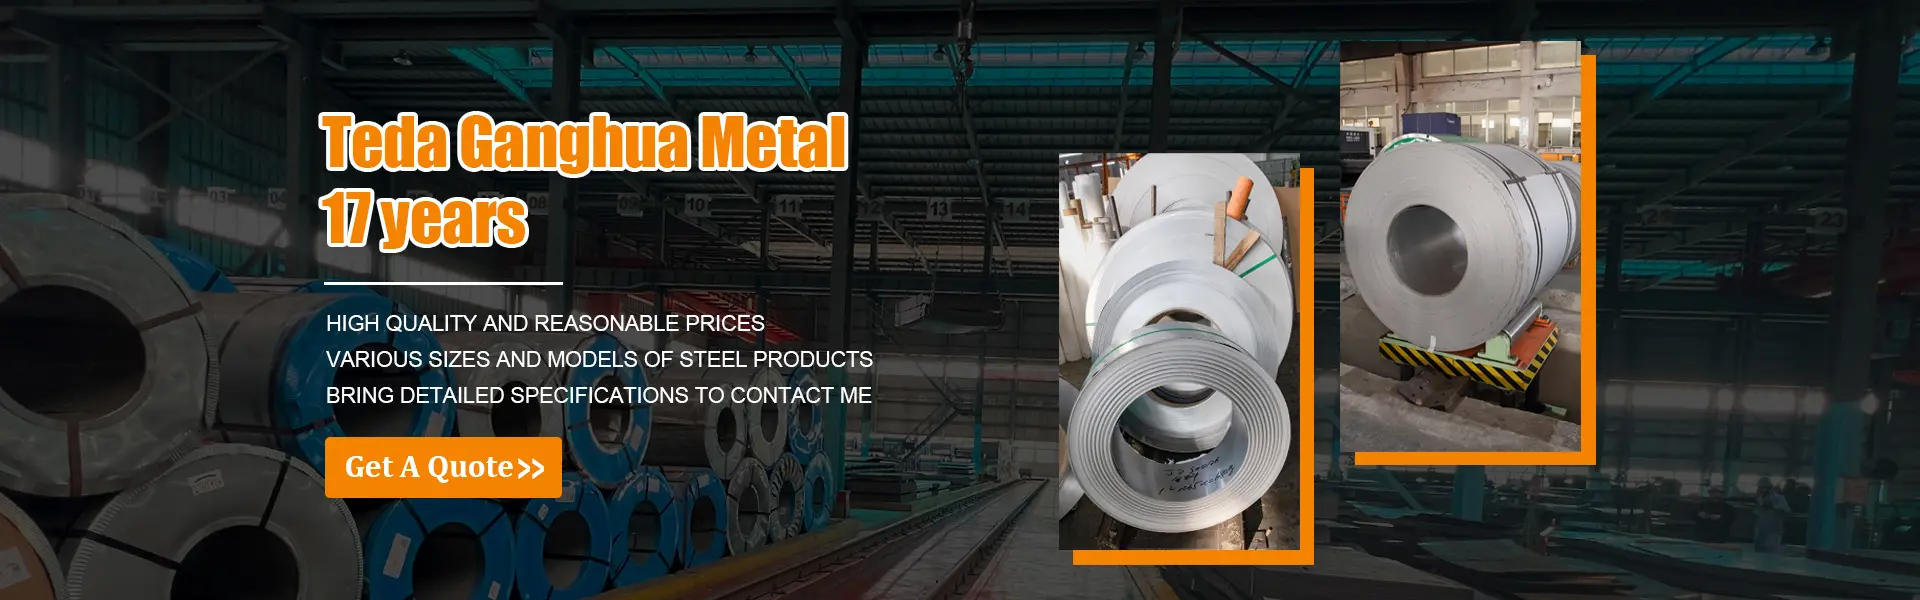 VARIOUS SIZES AND MODELS OF STEEL PRODUCTS